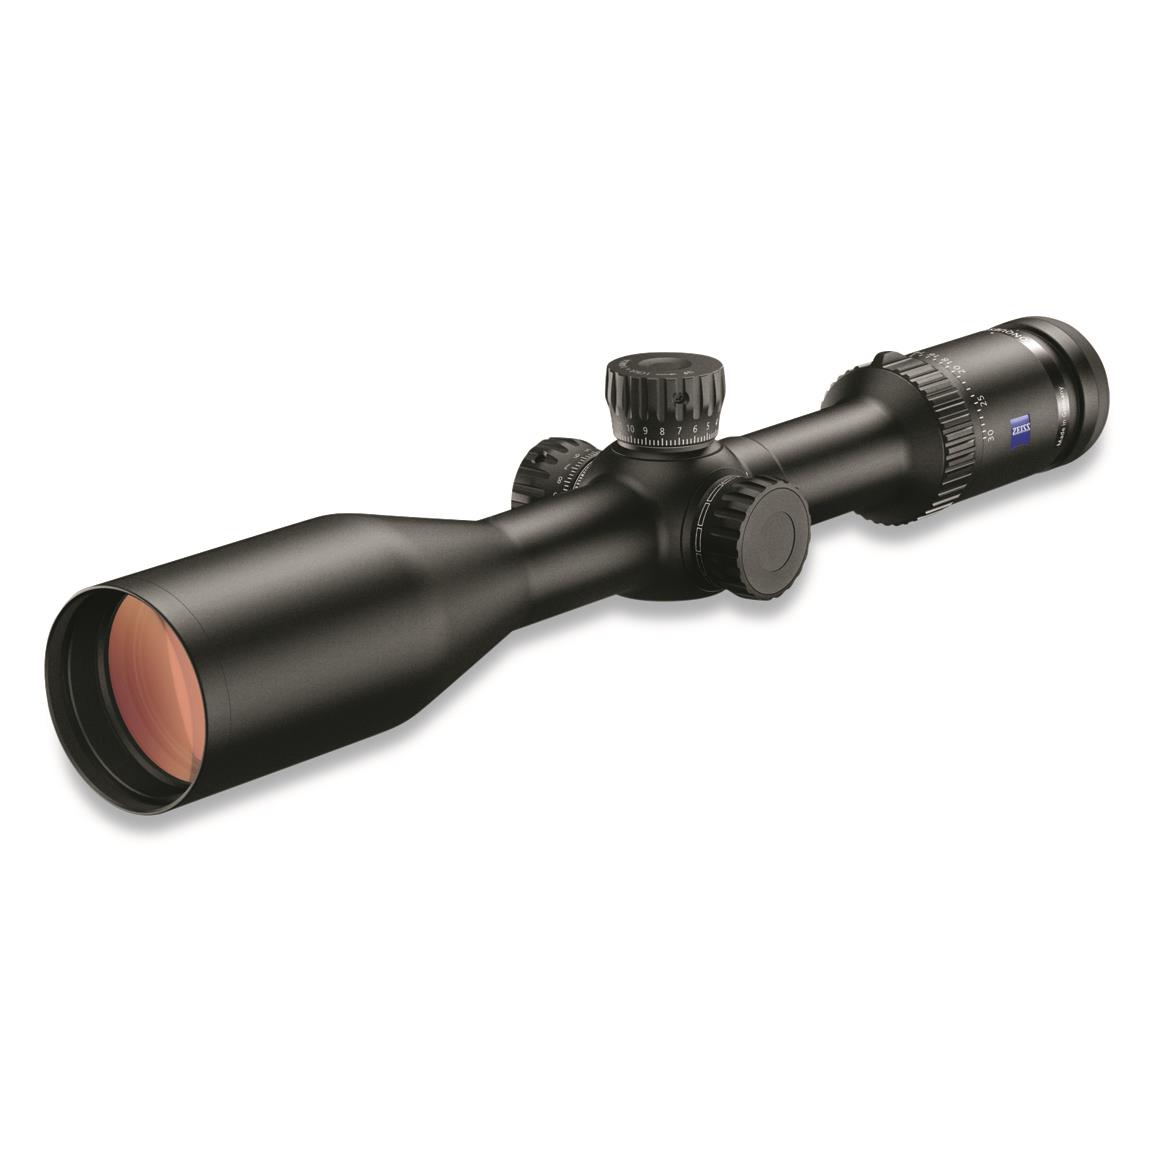 ZEISS Conquest V6 3-18x50mm Rifle Scope, ZBR-1 Reticle